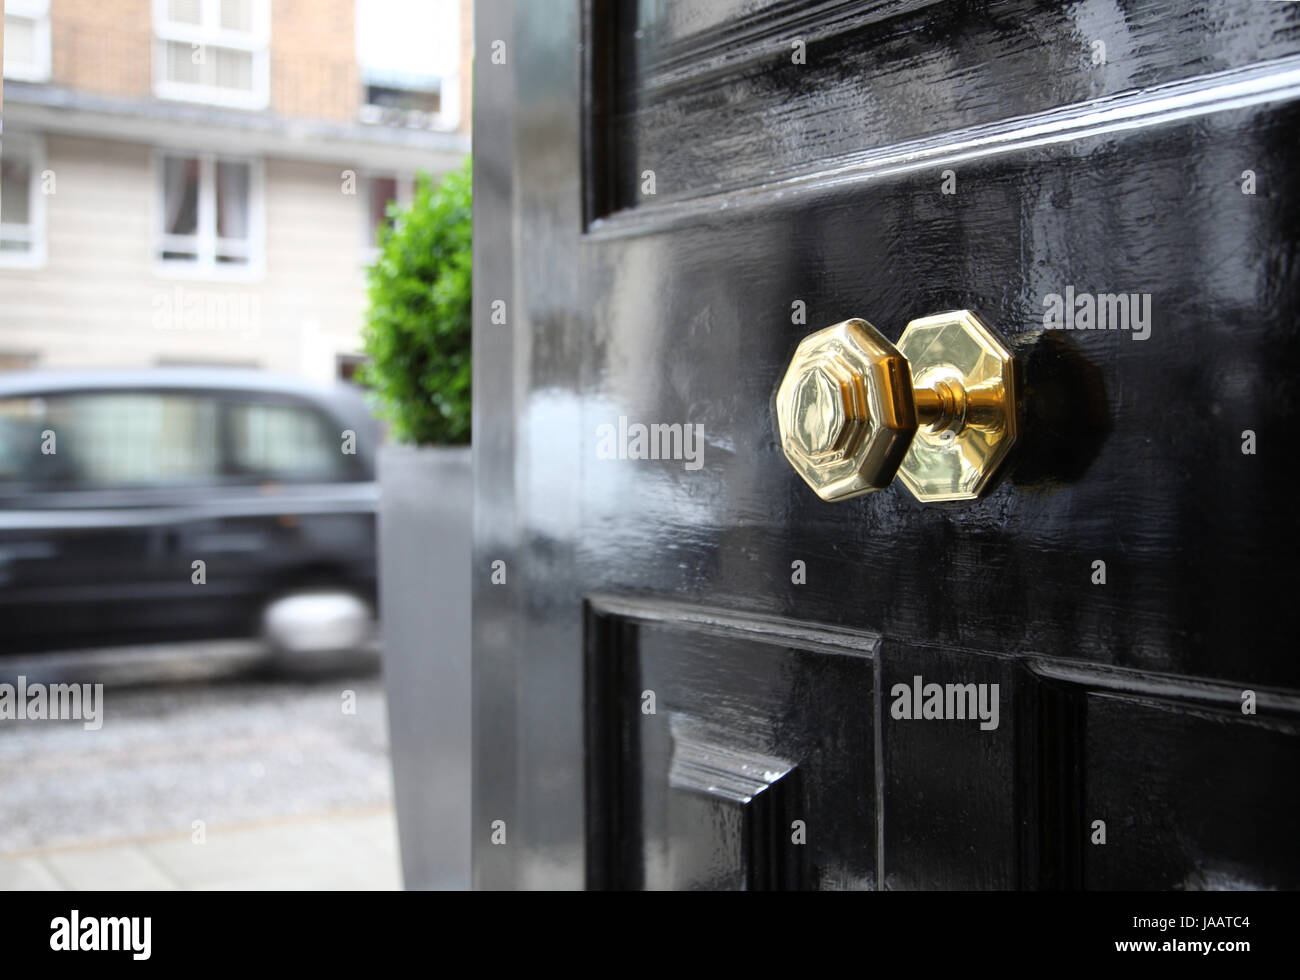 A typically British brass door knob on a front door on a central London street, UK. A London taxi passes. Stock Photo